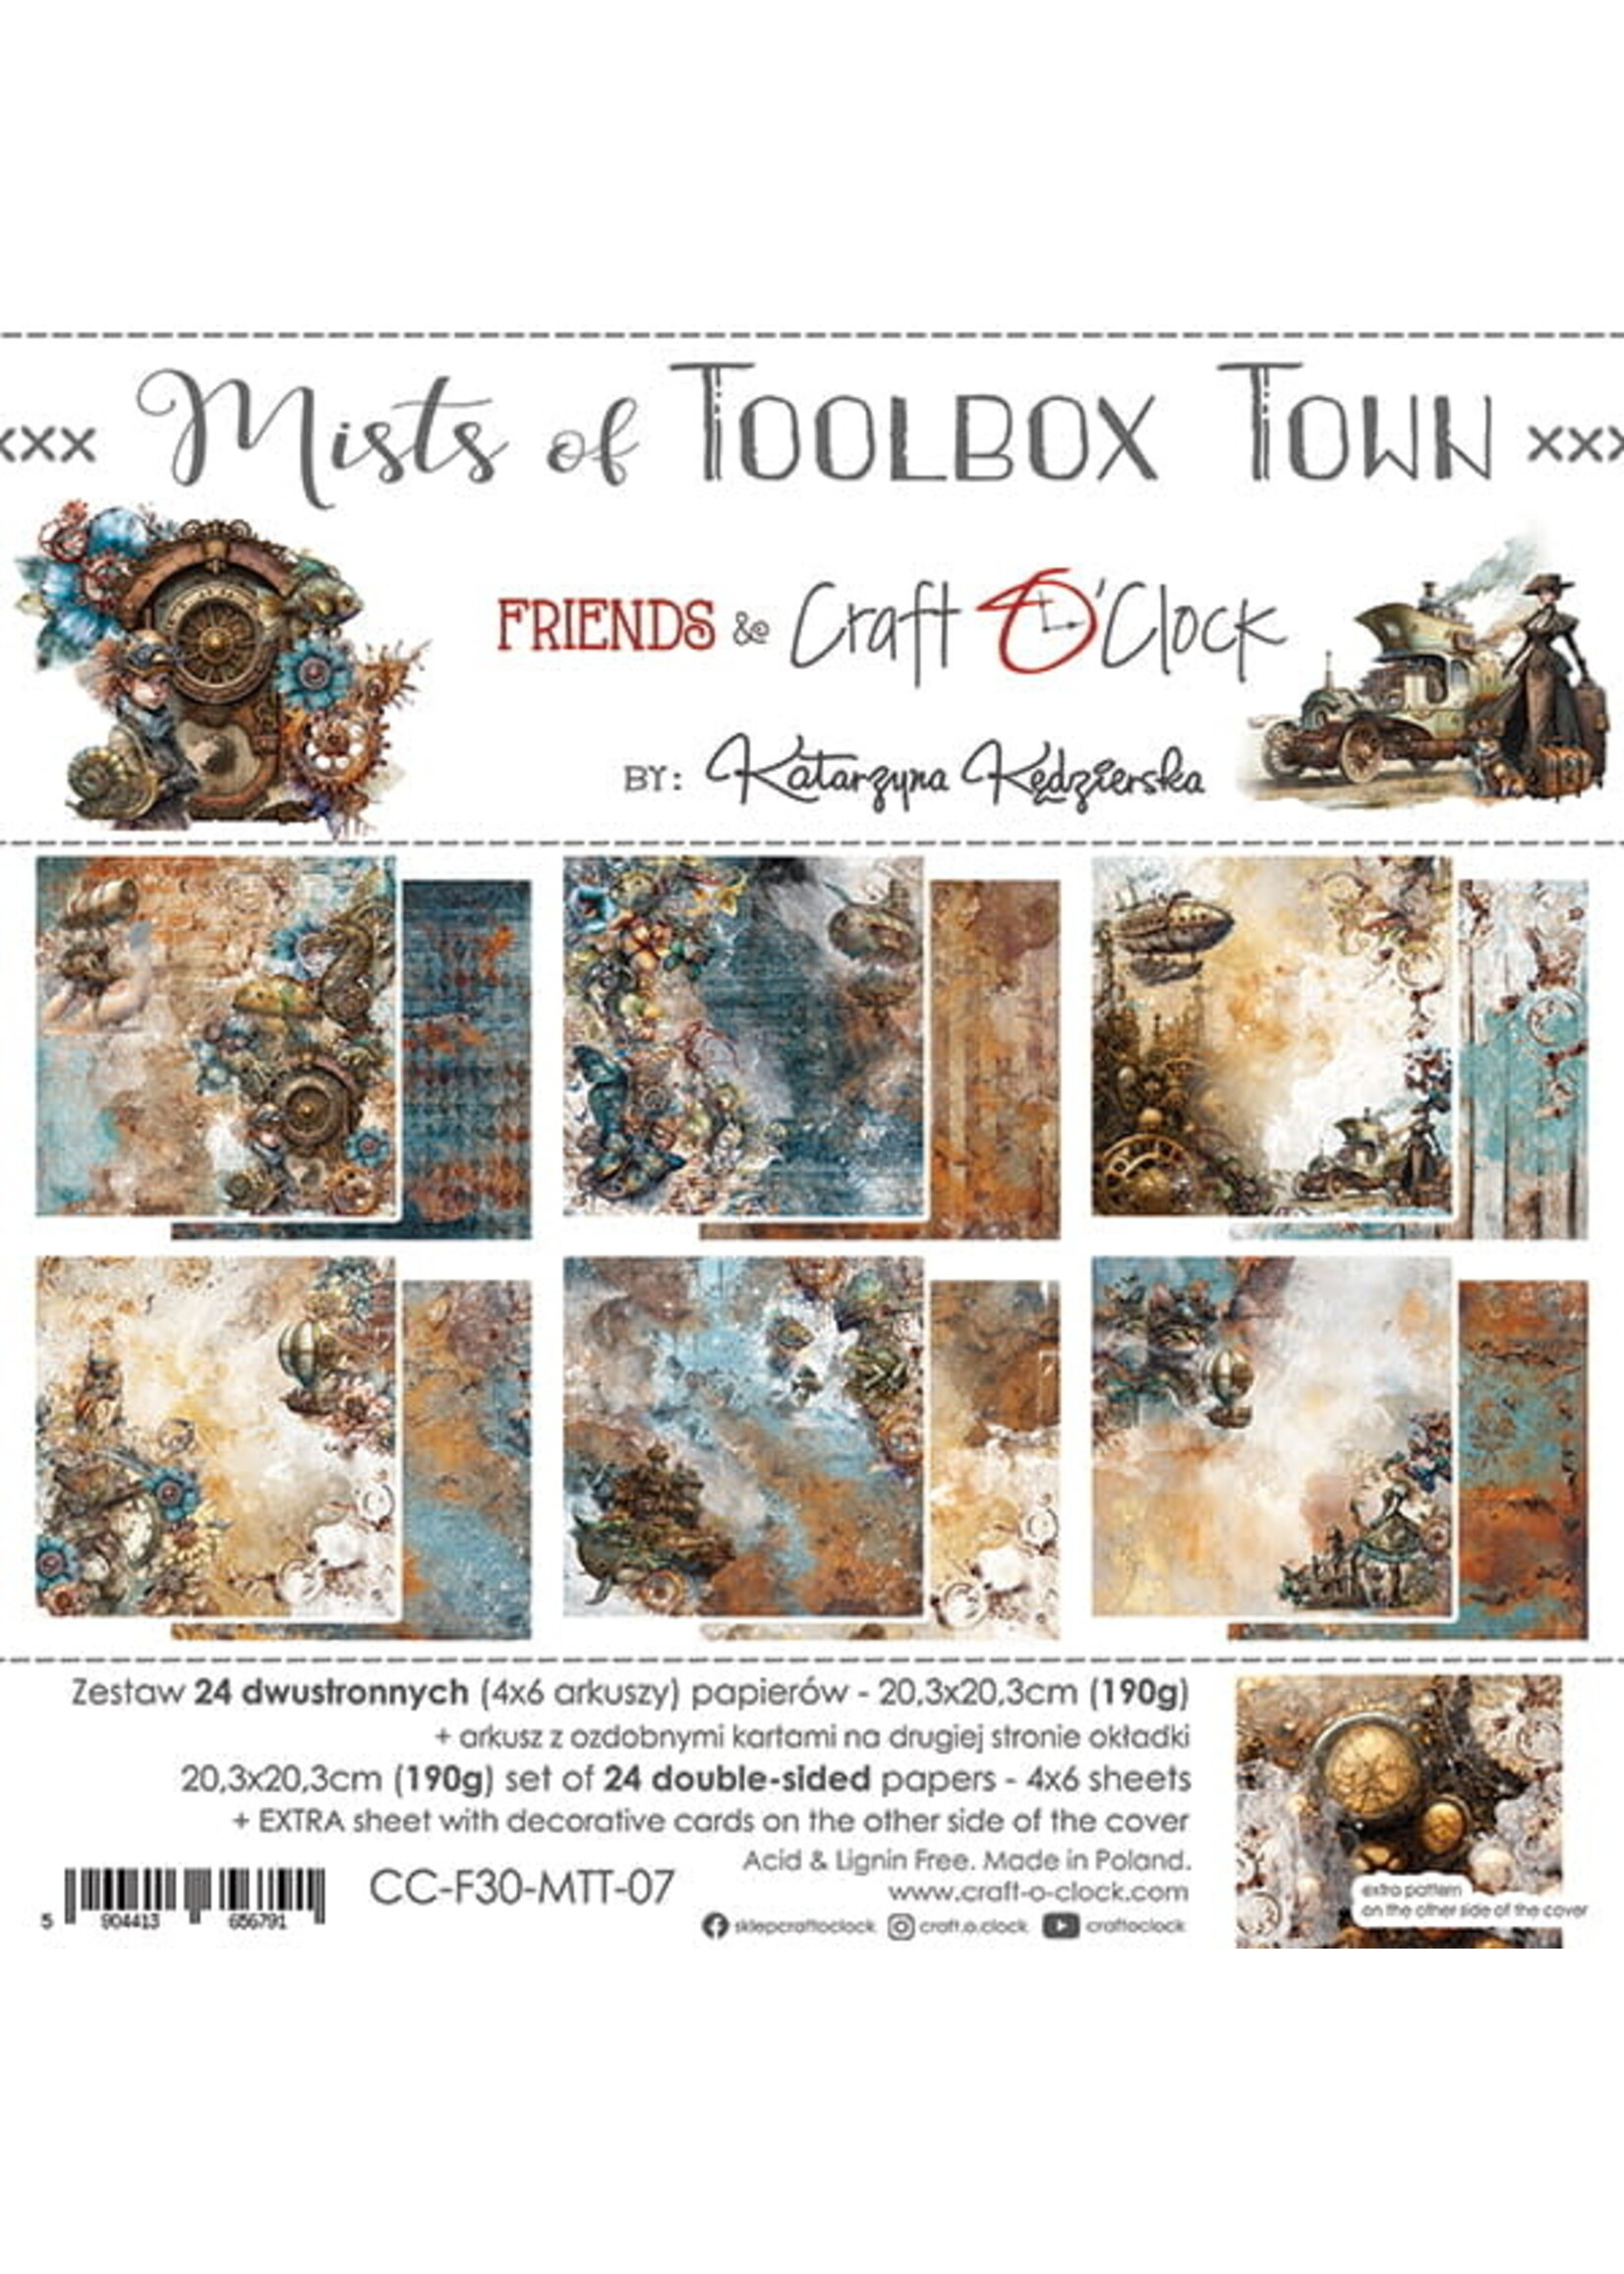 Craft O Clock MISTS OF TOOLBOX TOWN - A SET OF PAPERS 20,3X20,3CM